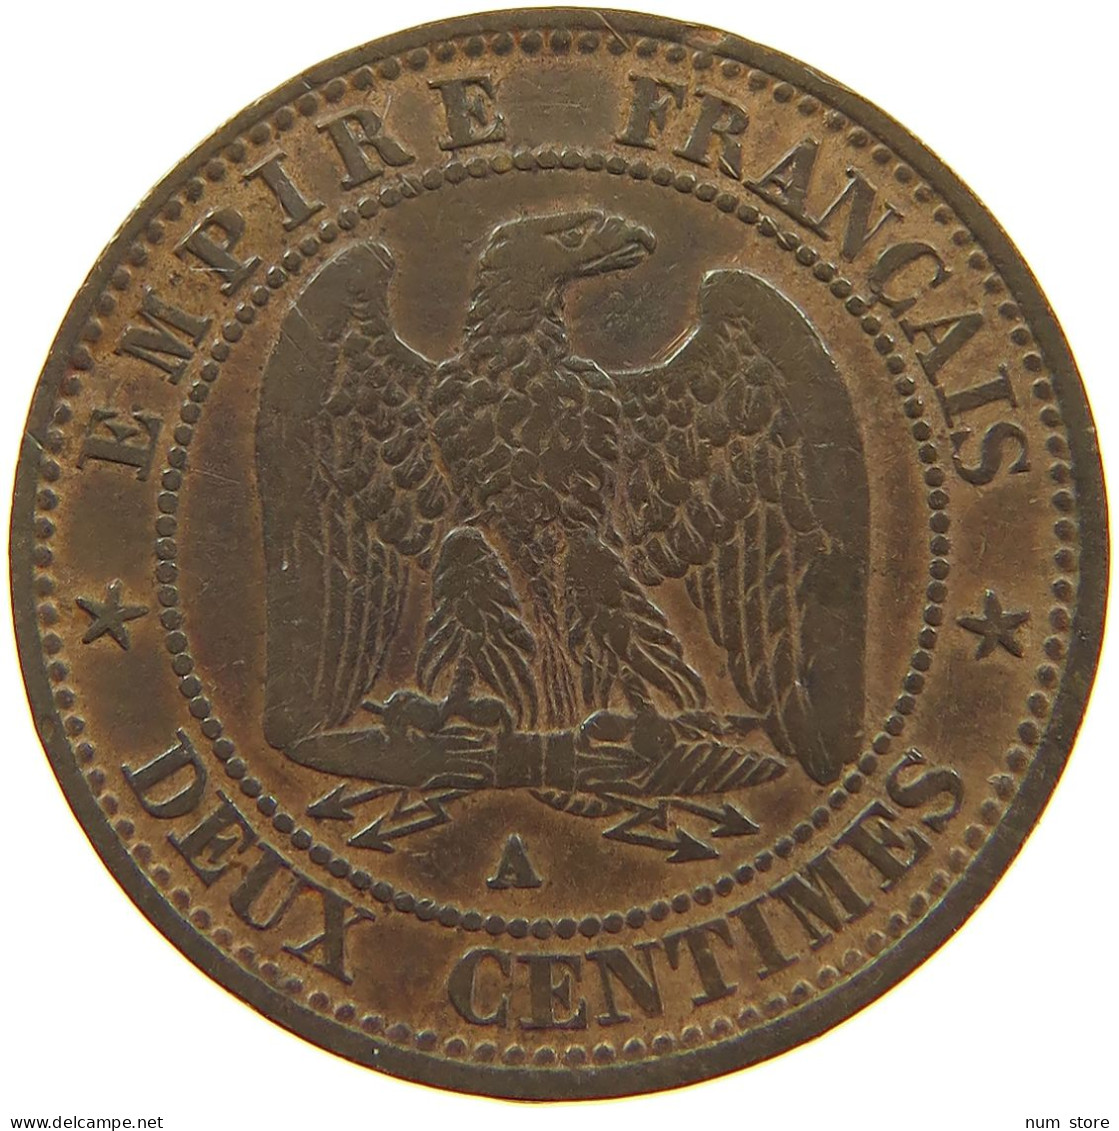 FRANCE 2 CENTIMES 1855 A Napoleon III. (1852-1870) #a085 0581 - 2 Centimes